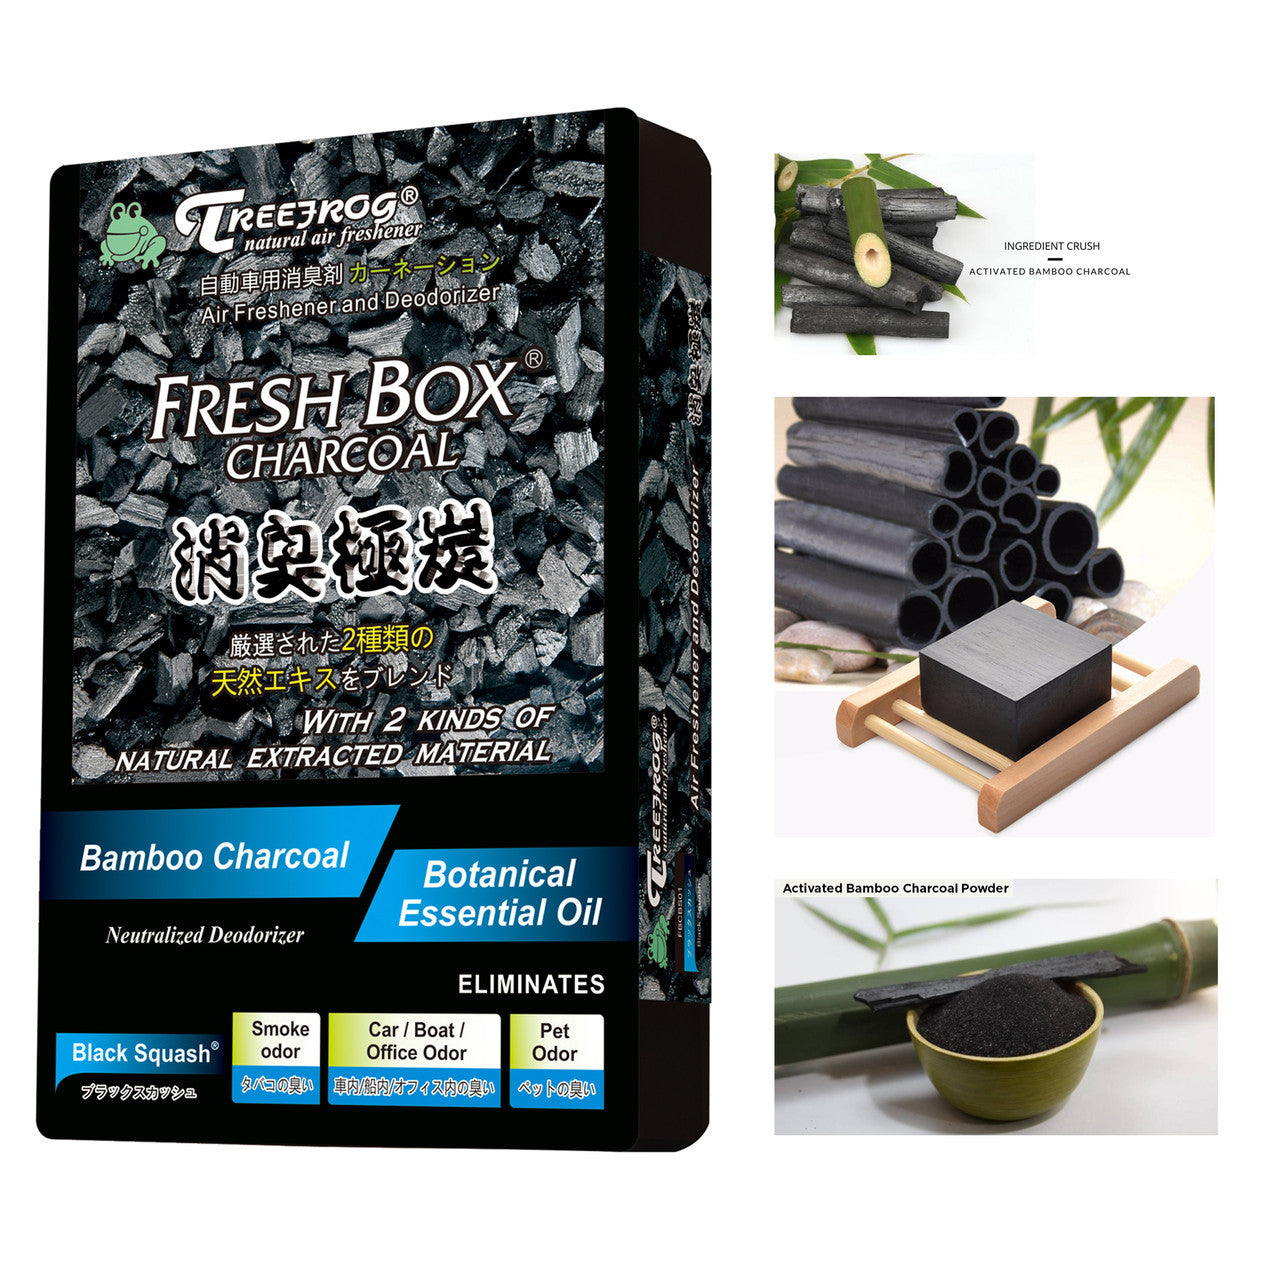 Treefrog Air Freshener, Bamboo Charcoal, Black Squash Scent 30 packs (1 Case), Captures, Eliminates Odors, Purifies and Freshens Air